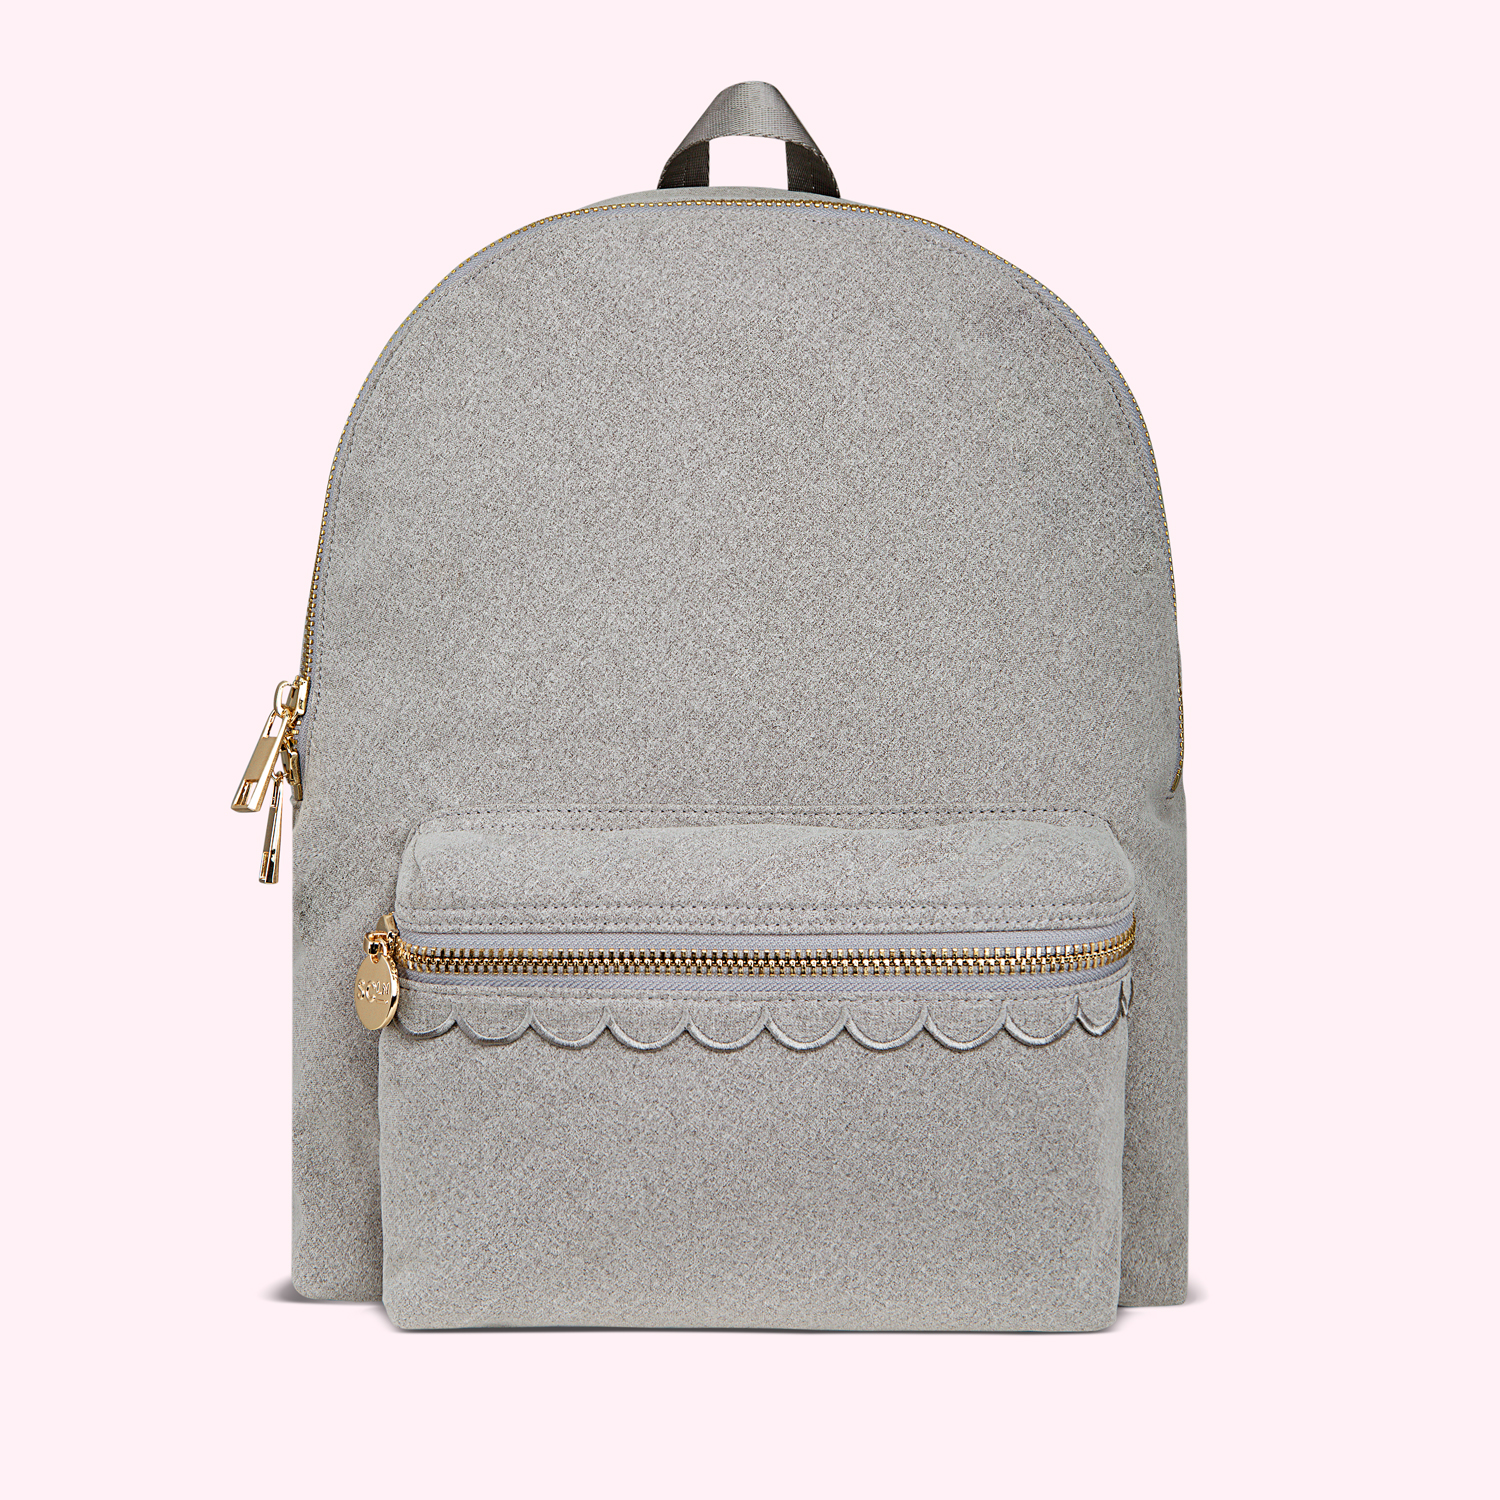 Scalloped Classic Backpack in Heather - Customizable